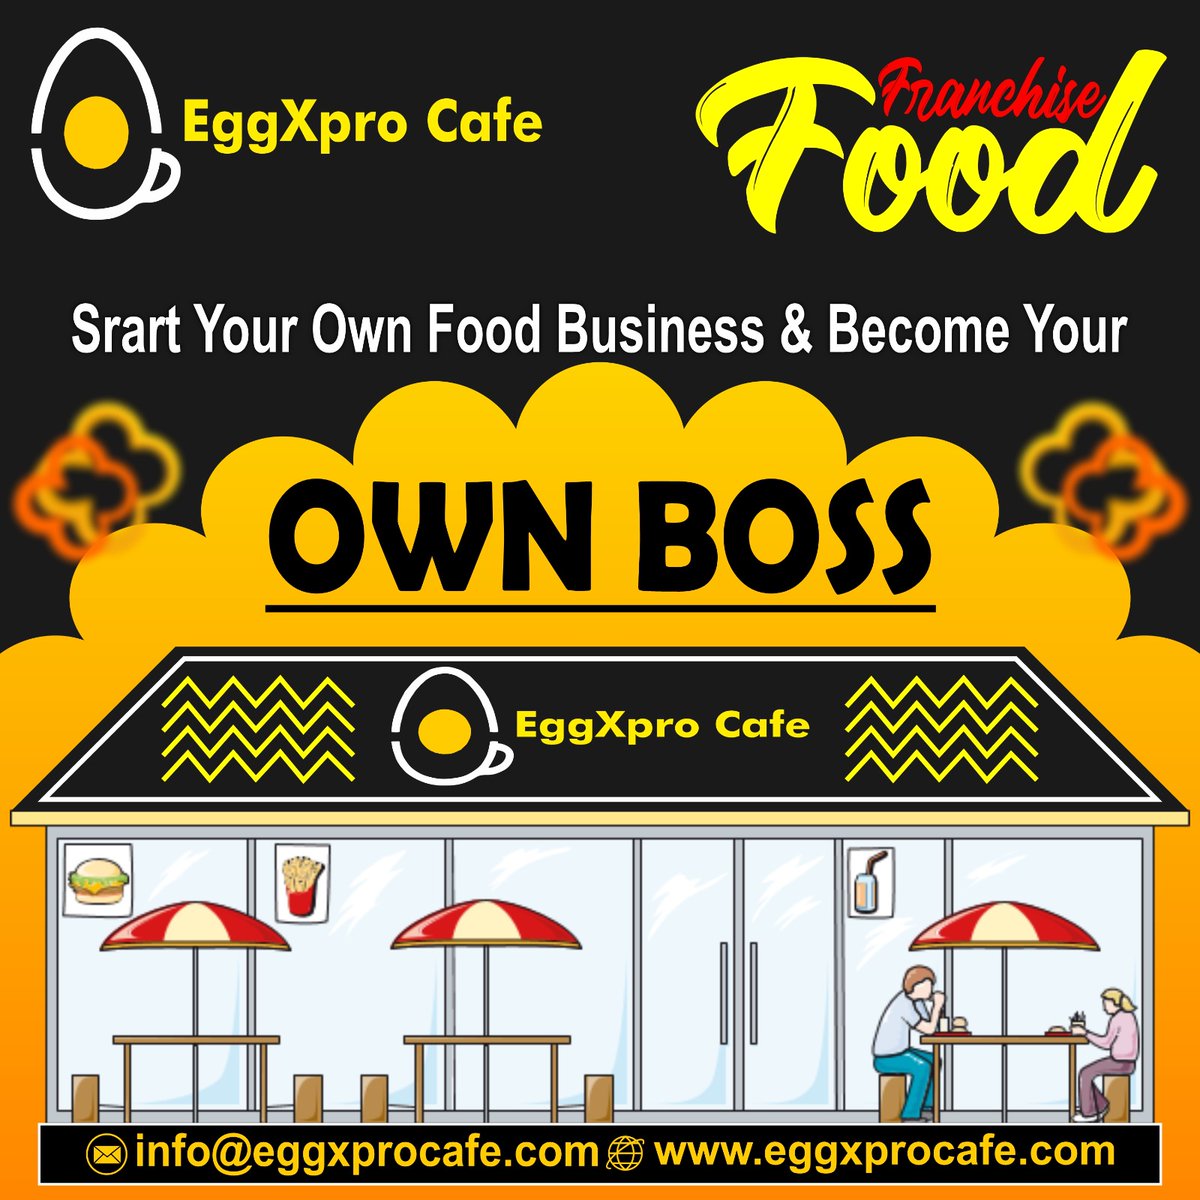 EggXpro is a egg food franchise company that aims to help your own business. If you want a Egg franchise, then this is a good option to consider
.
#eggxprocafe #eggdishes #Eggxprocafeoutlet #HighROI #eggfood #startup #foodindustry #franchisees #HighProfit #business #foodfranchise